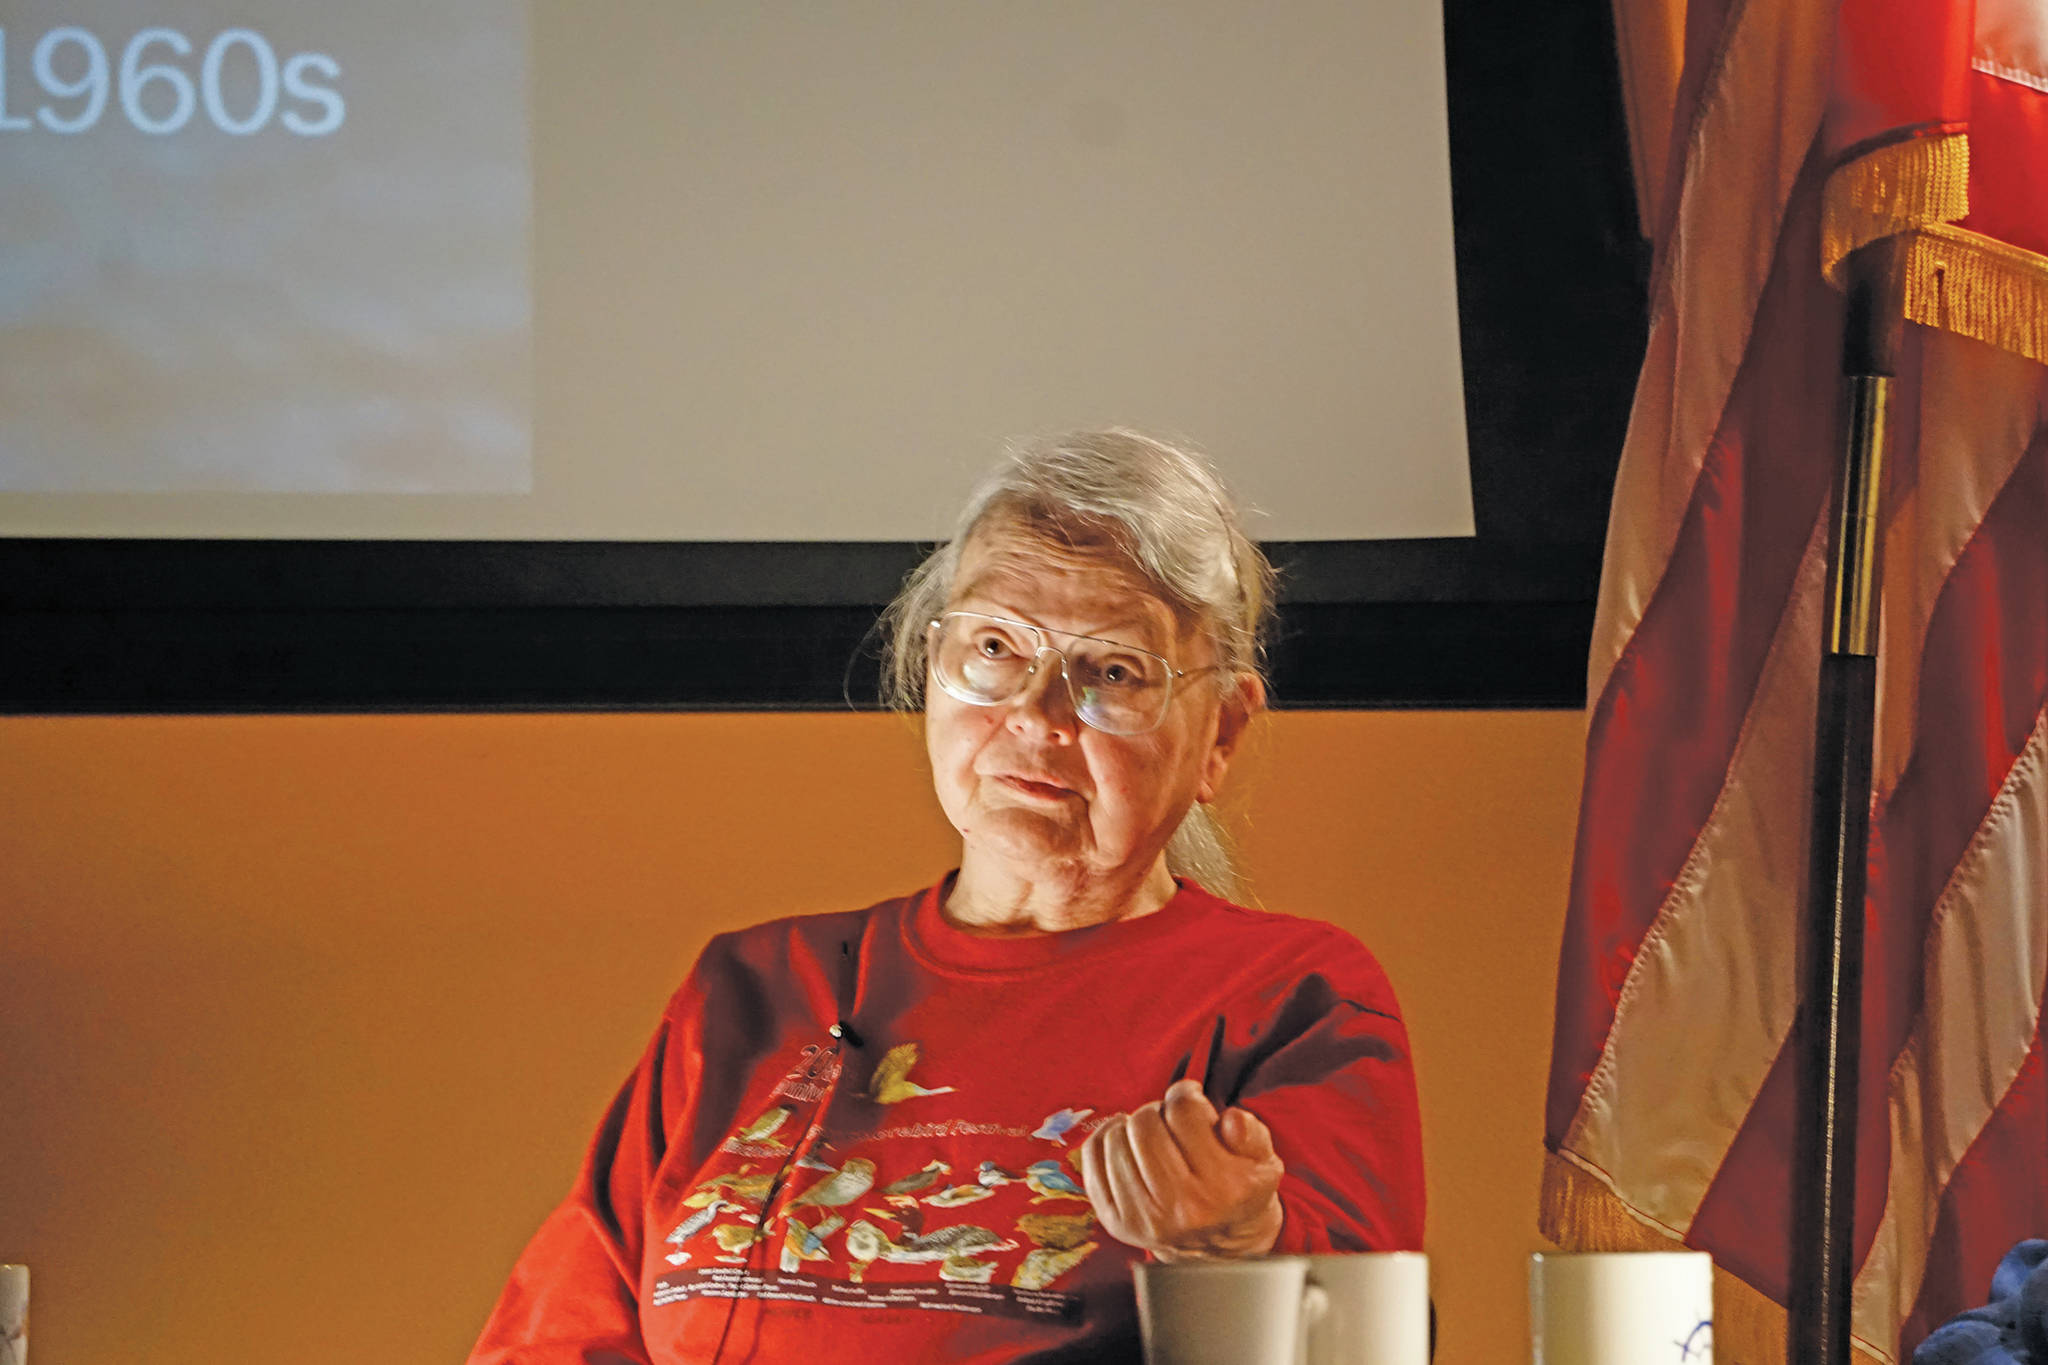 Laura Lofgren Barton speaks Dec. 12, 2019, at “Homestead Kids 3,” at the annual meeting of the Kachemak Heritage Land Trust at the Alaska Islands and Ocean Visitor Center in Homer, Alaska. (Photo by Michael Armstrong/Homer News)